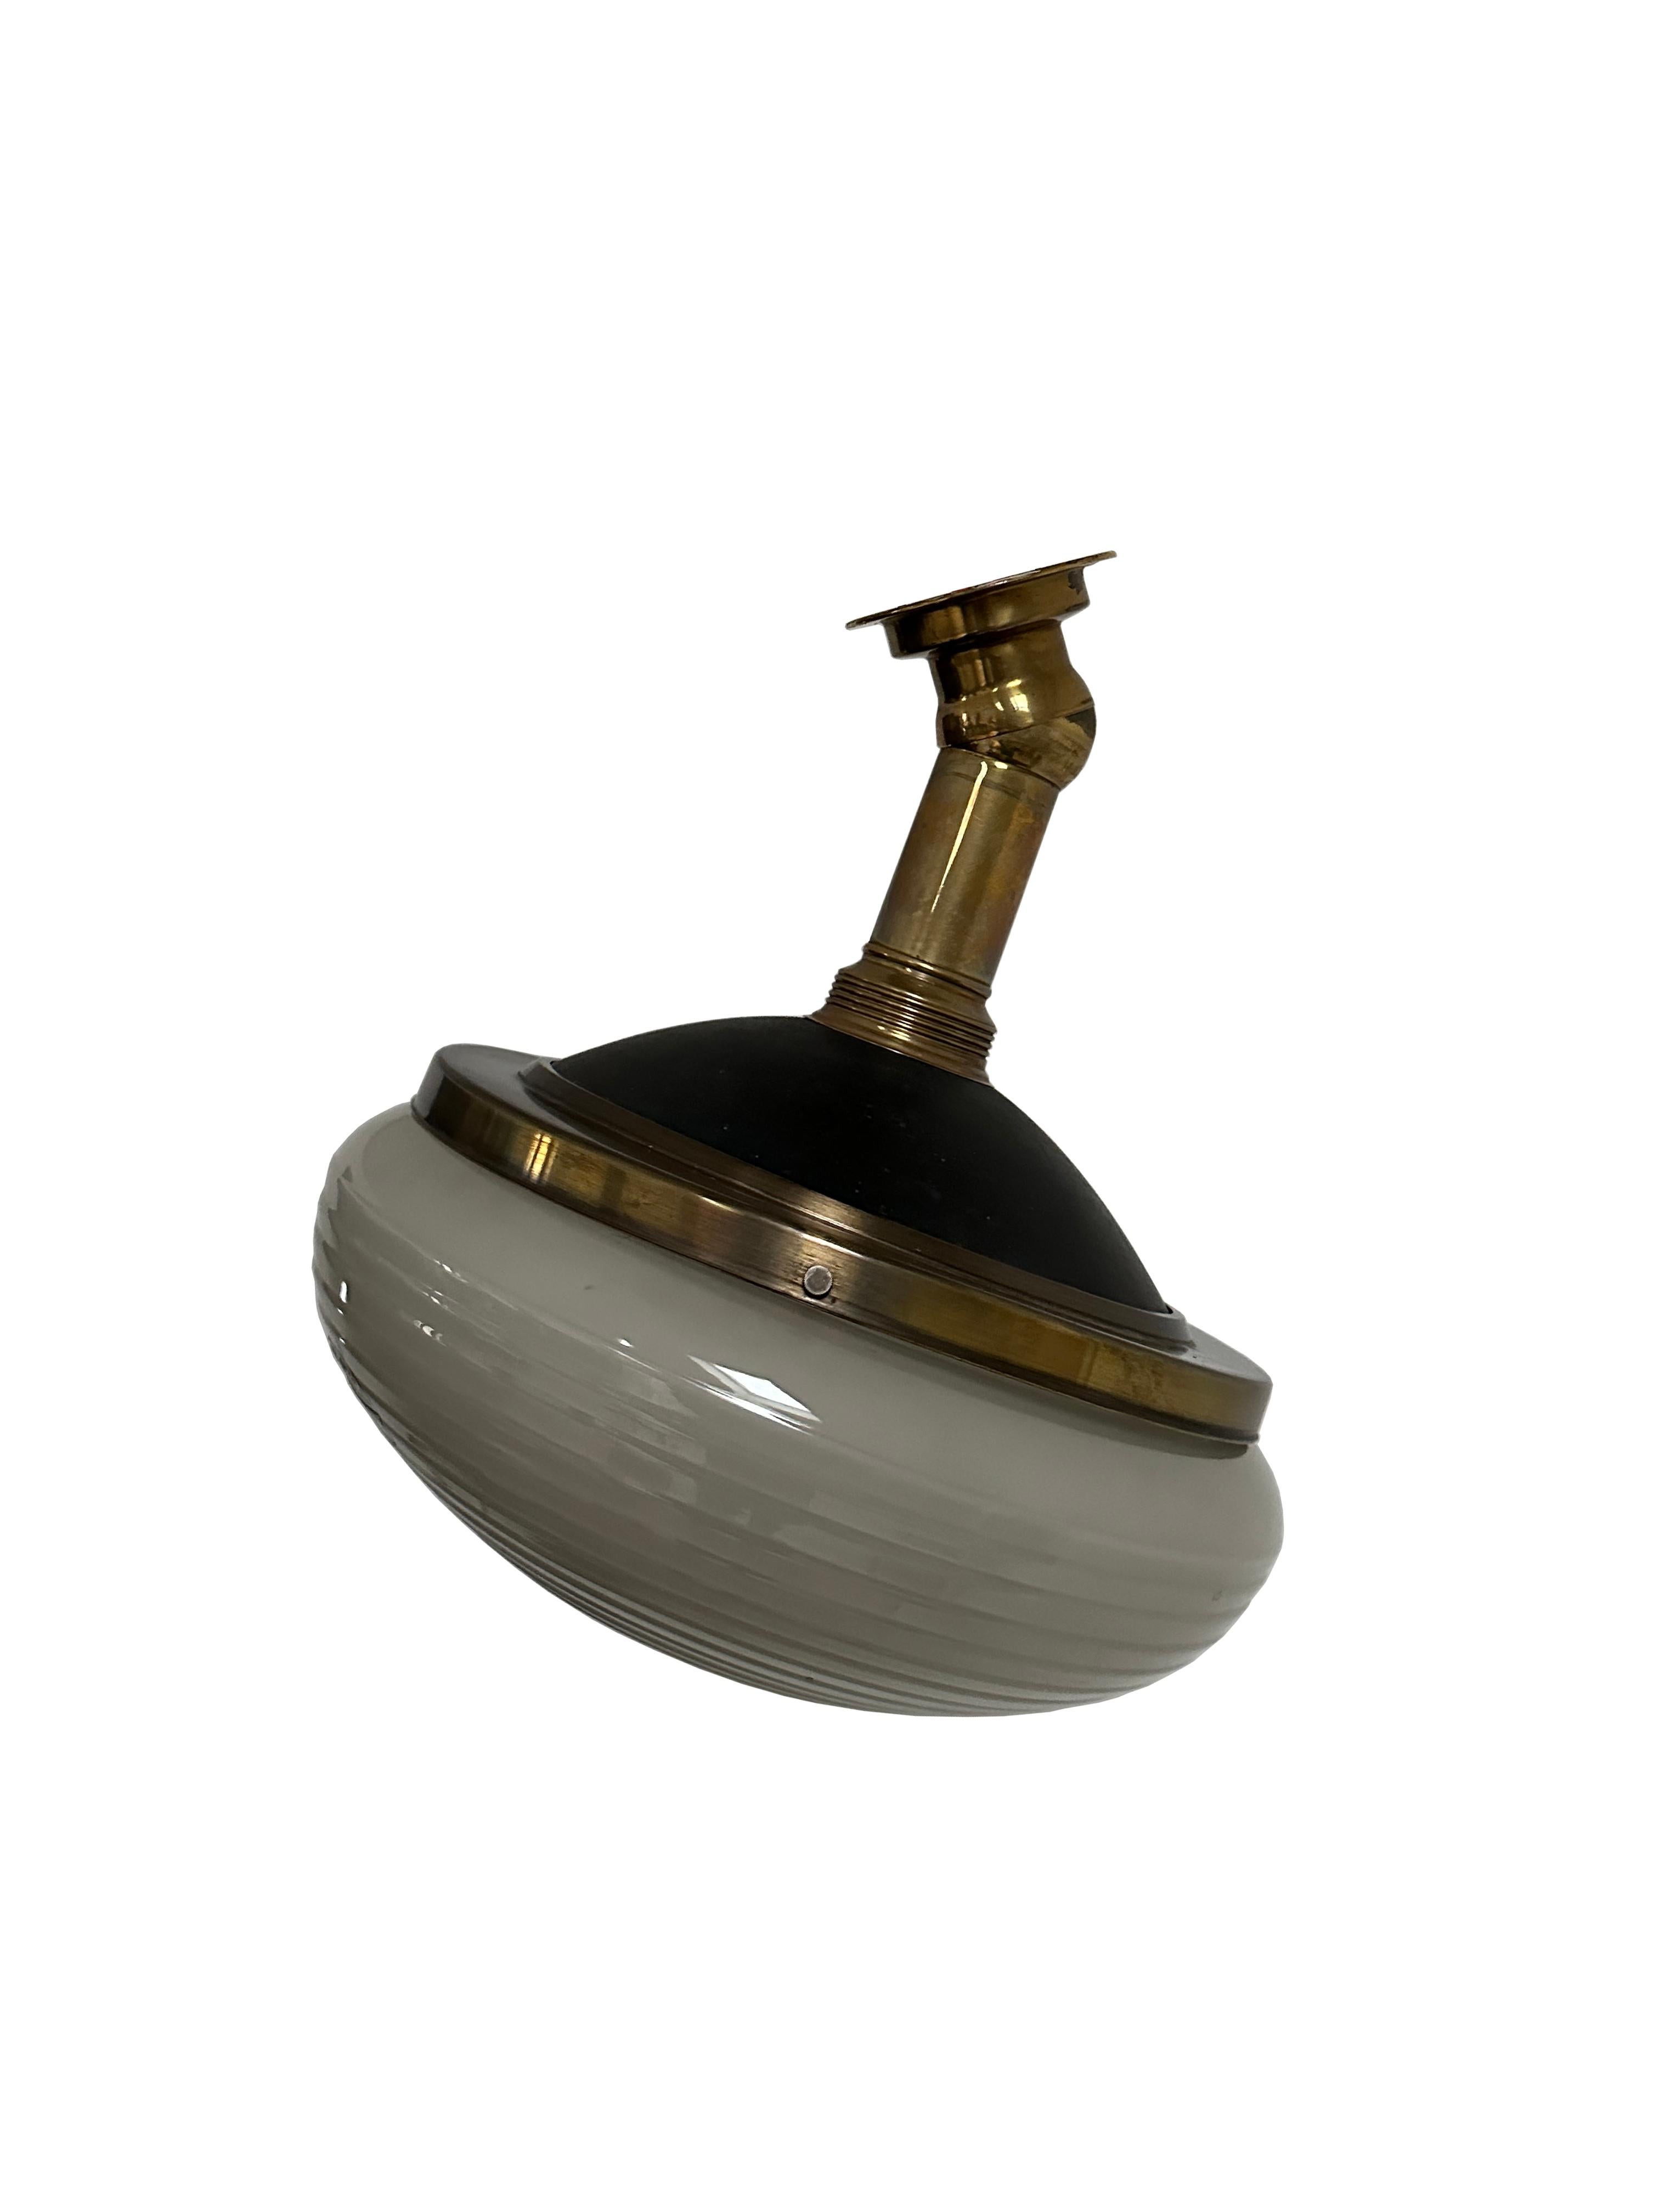 - An extremely rare Carl Zeiss Jena ceiling/wall lamp by Adolf Meyer, Germany circa 1920.
- Designed by well known Bauhaus architect Adolf Meyer, the lamp has a stepped brass body with acid etched glass bowl shade which is fully stamped 'Carl Zeiss